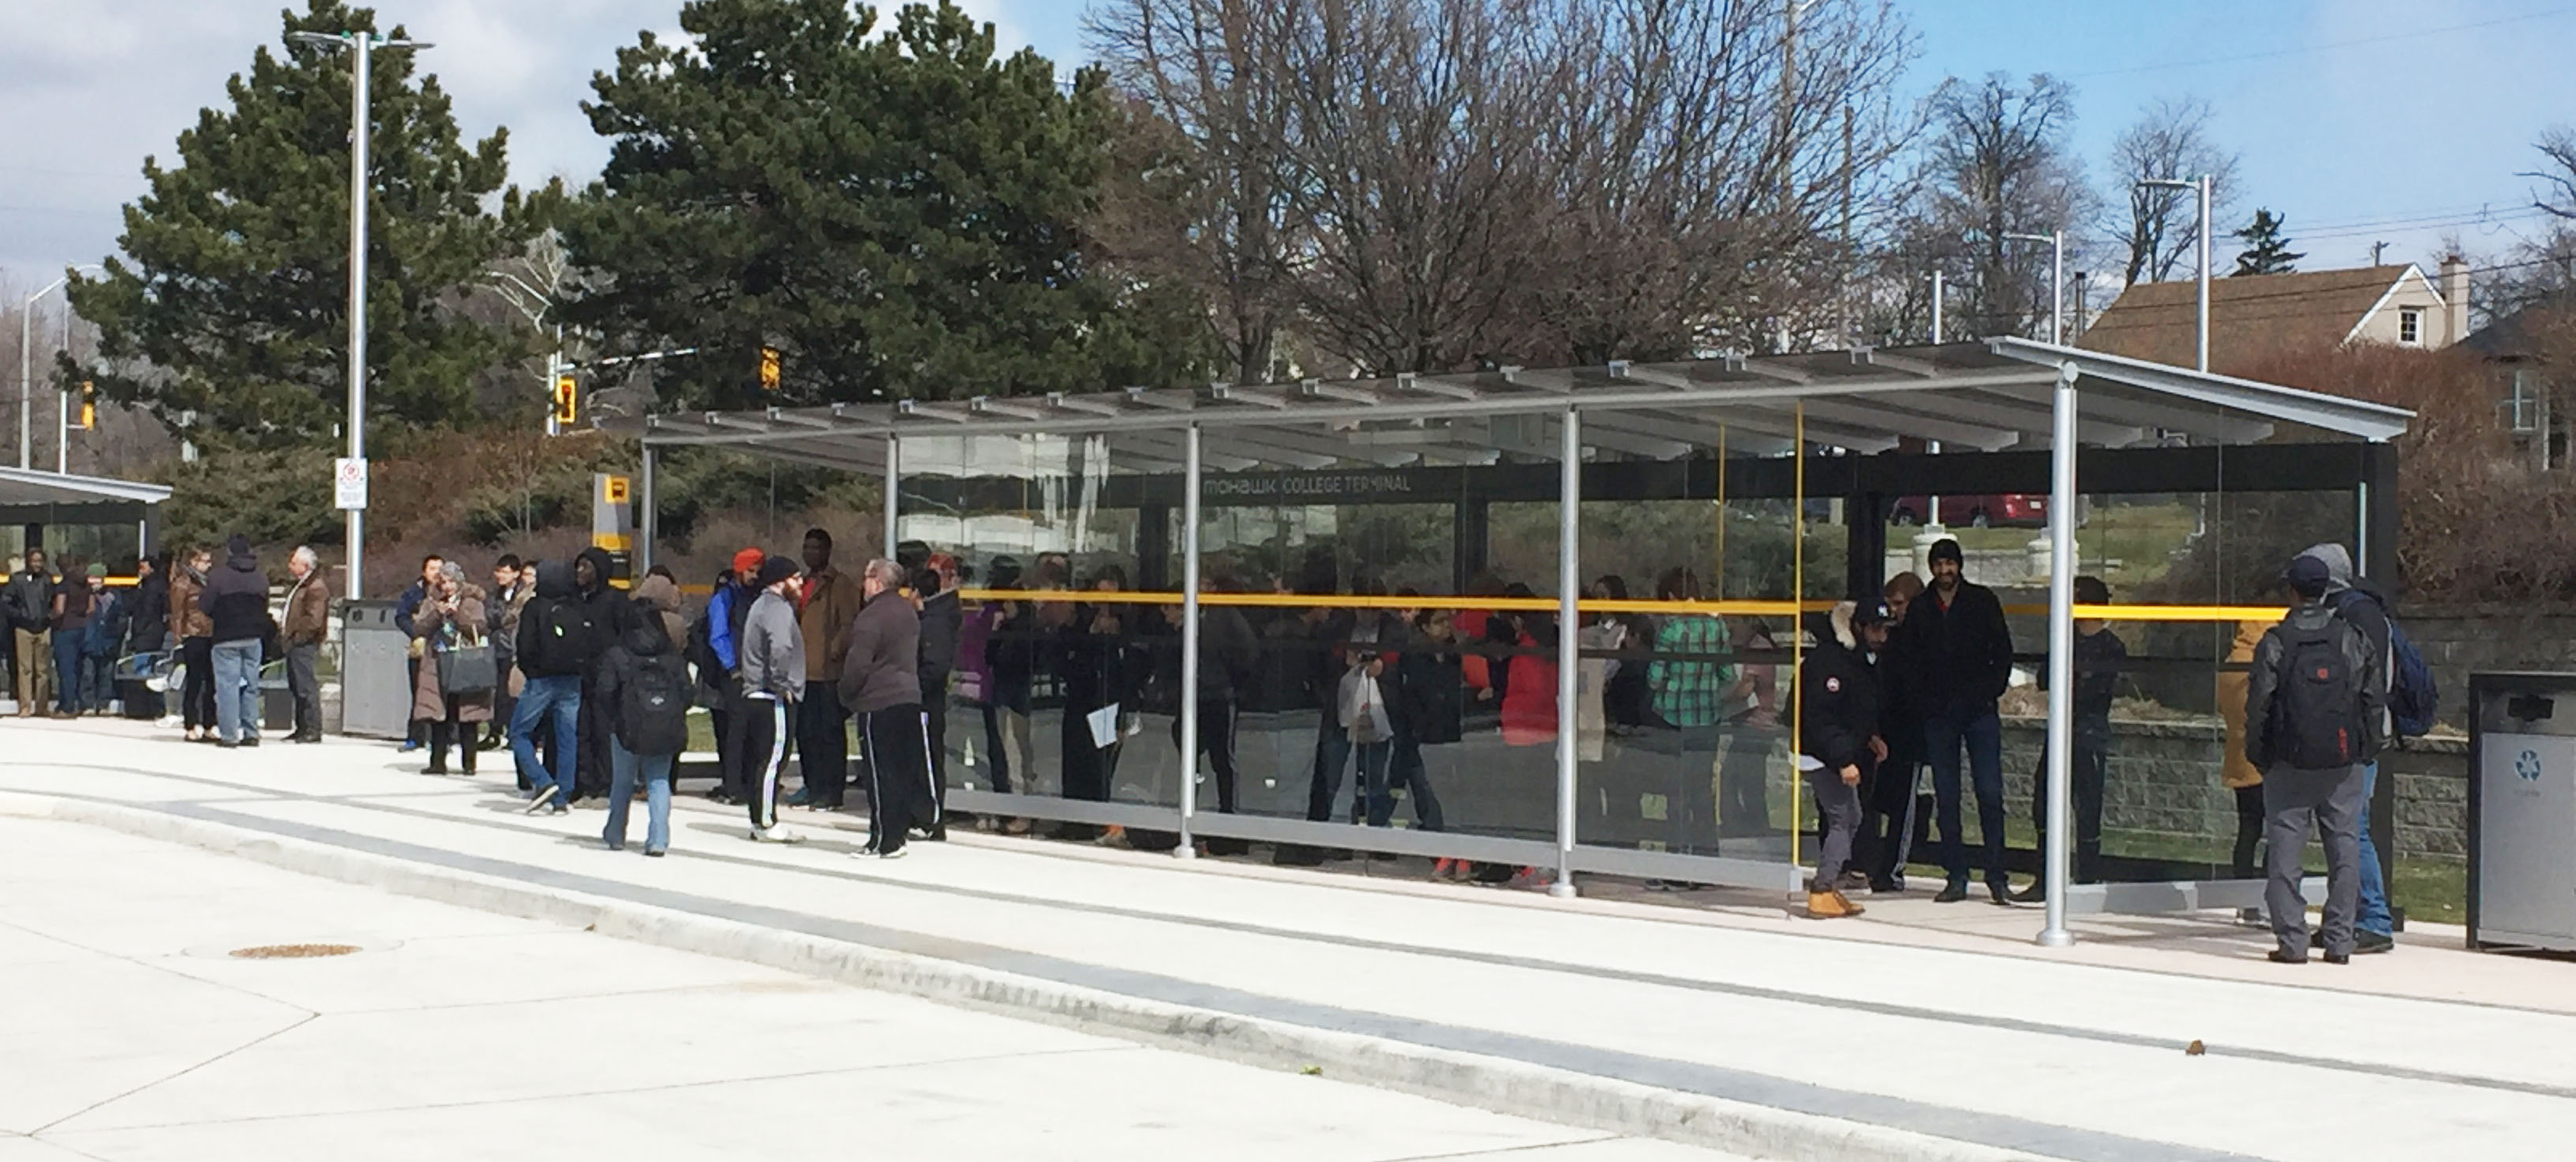 People standing under a transit terminal shelter